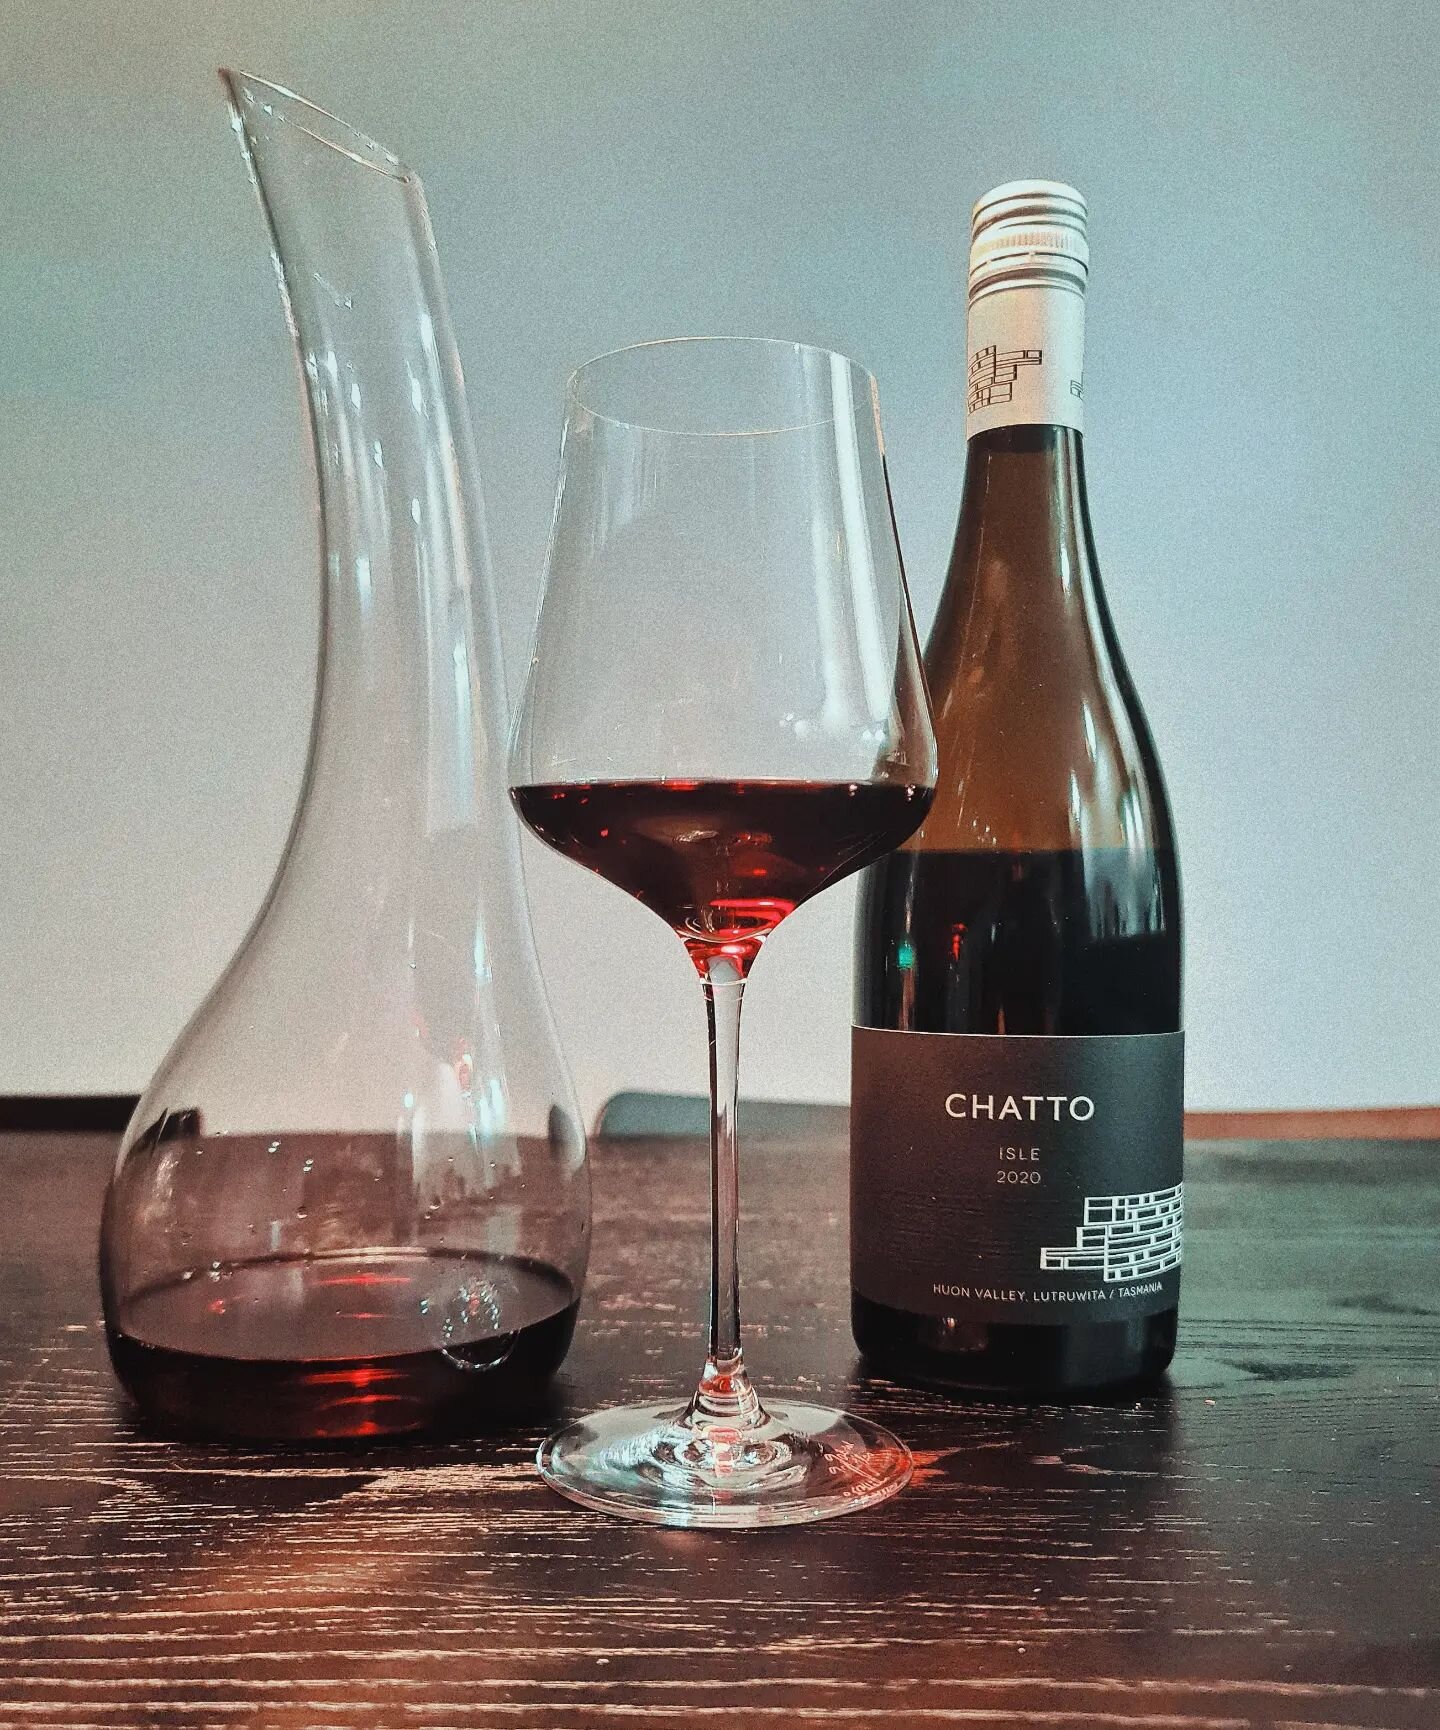 An entrancing perfume of wild flora, dark cherry, savoury thyme and petrichor emanate deeply in the glass. I am completely immersed in dried roses, liquorice and dried spices on the palate.&nbsp; This is a wine I'd shine my shoes for.  This is nek le